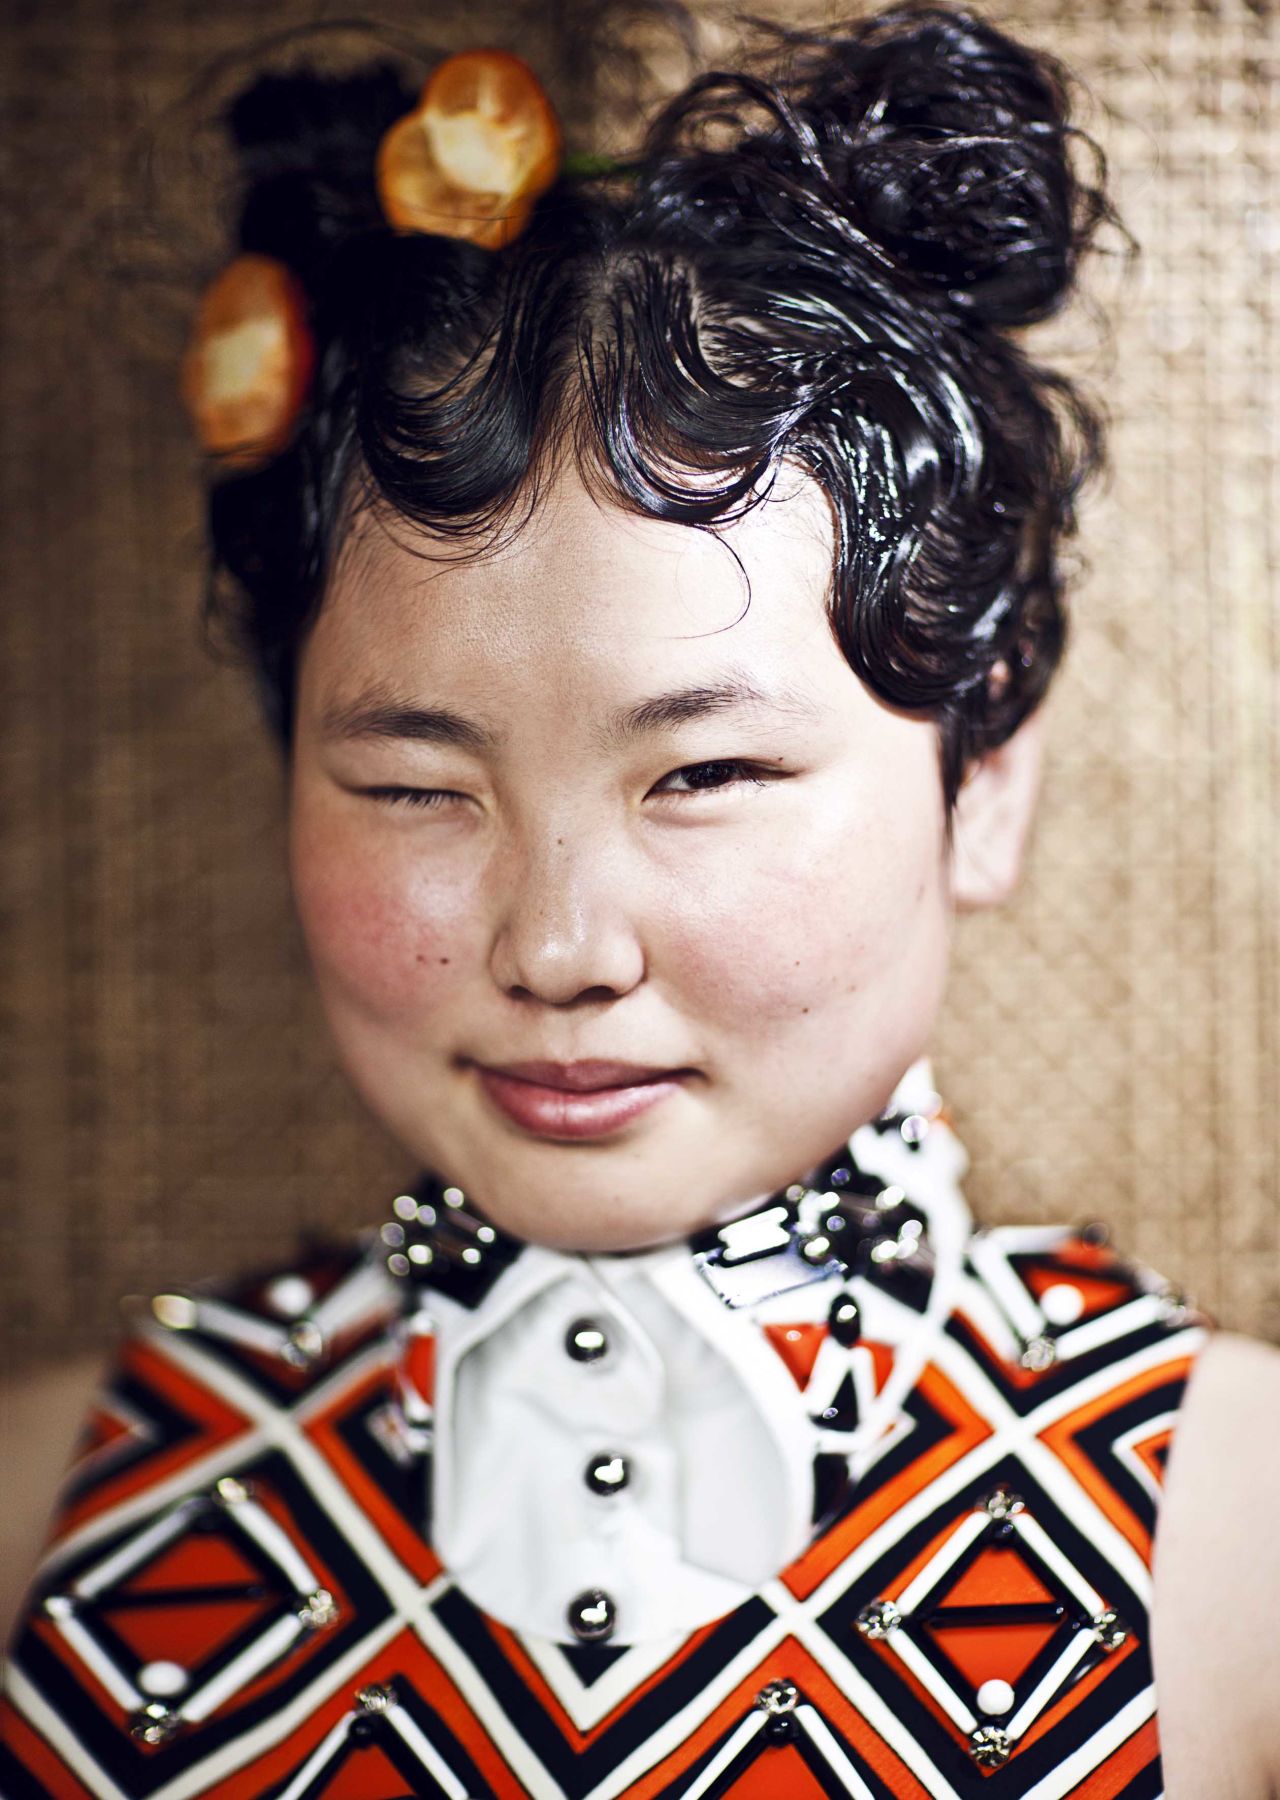 This portrait of a waitress at a vegetarian restaurant, was shot in 2012 for i.D. The series depicted China's ethnic minorities.